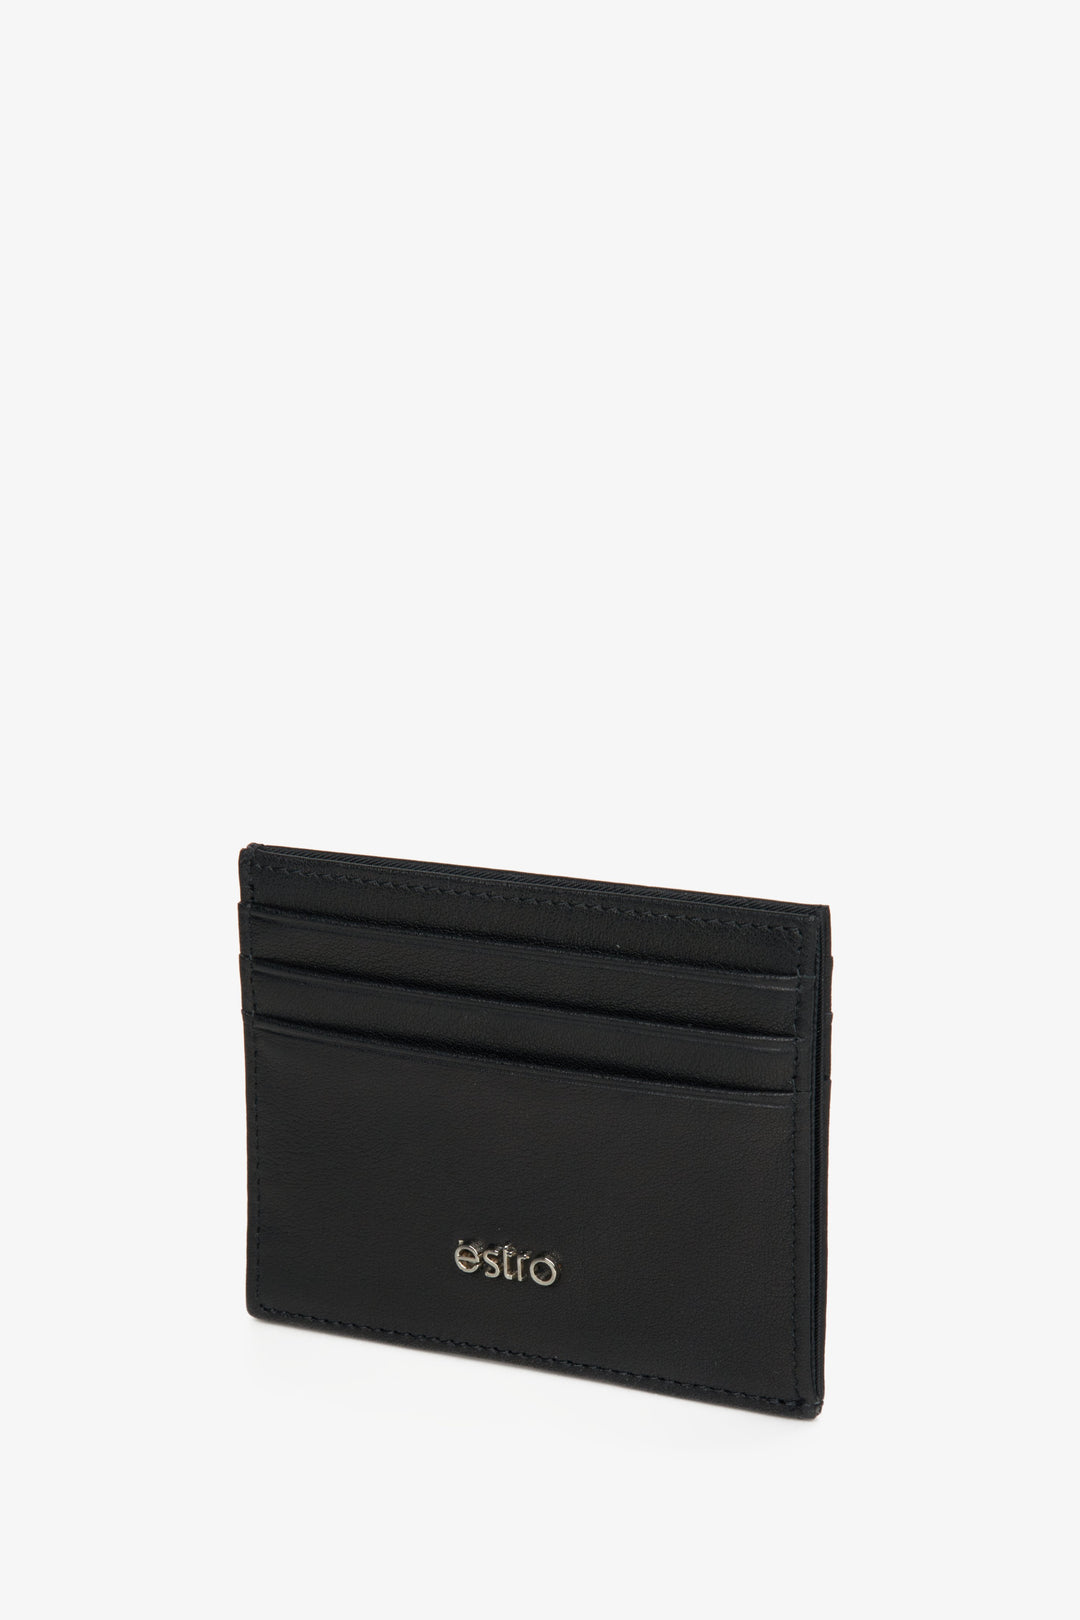 A black leather document holder.